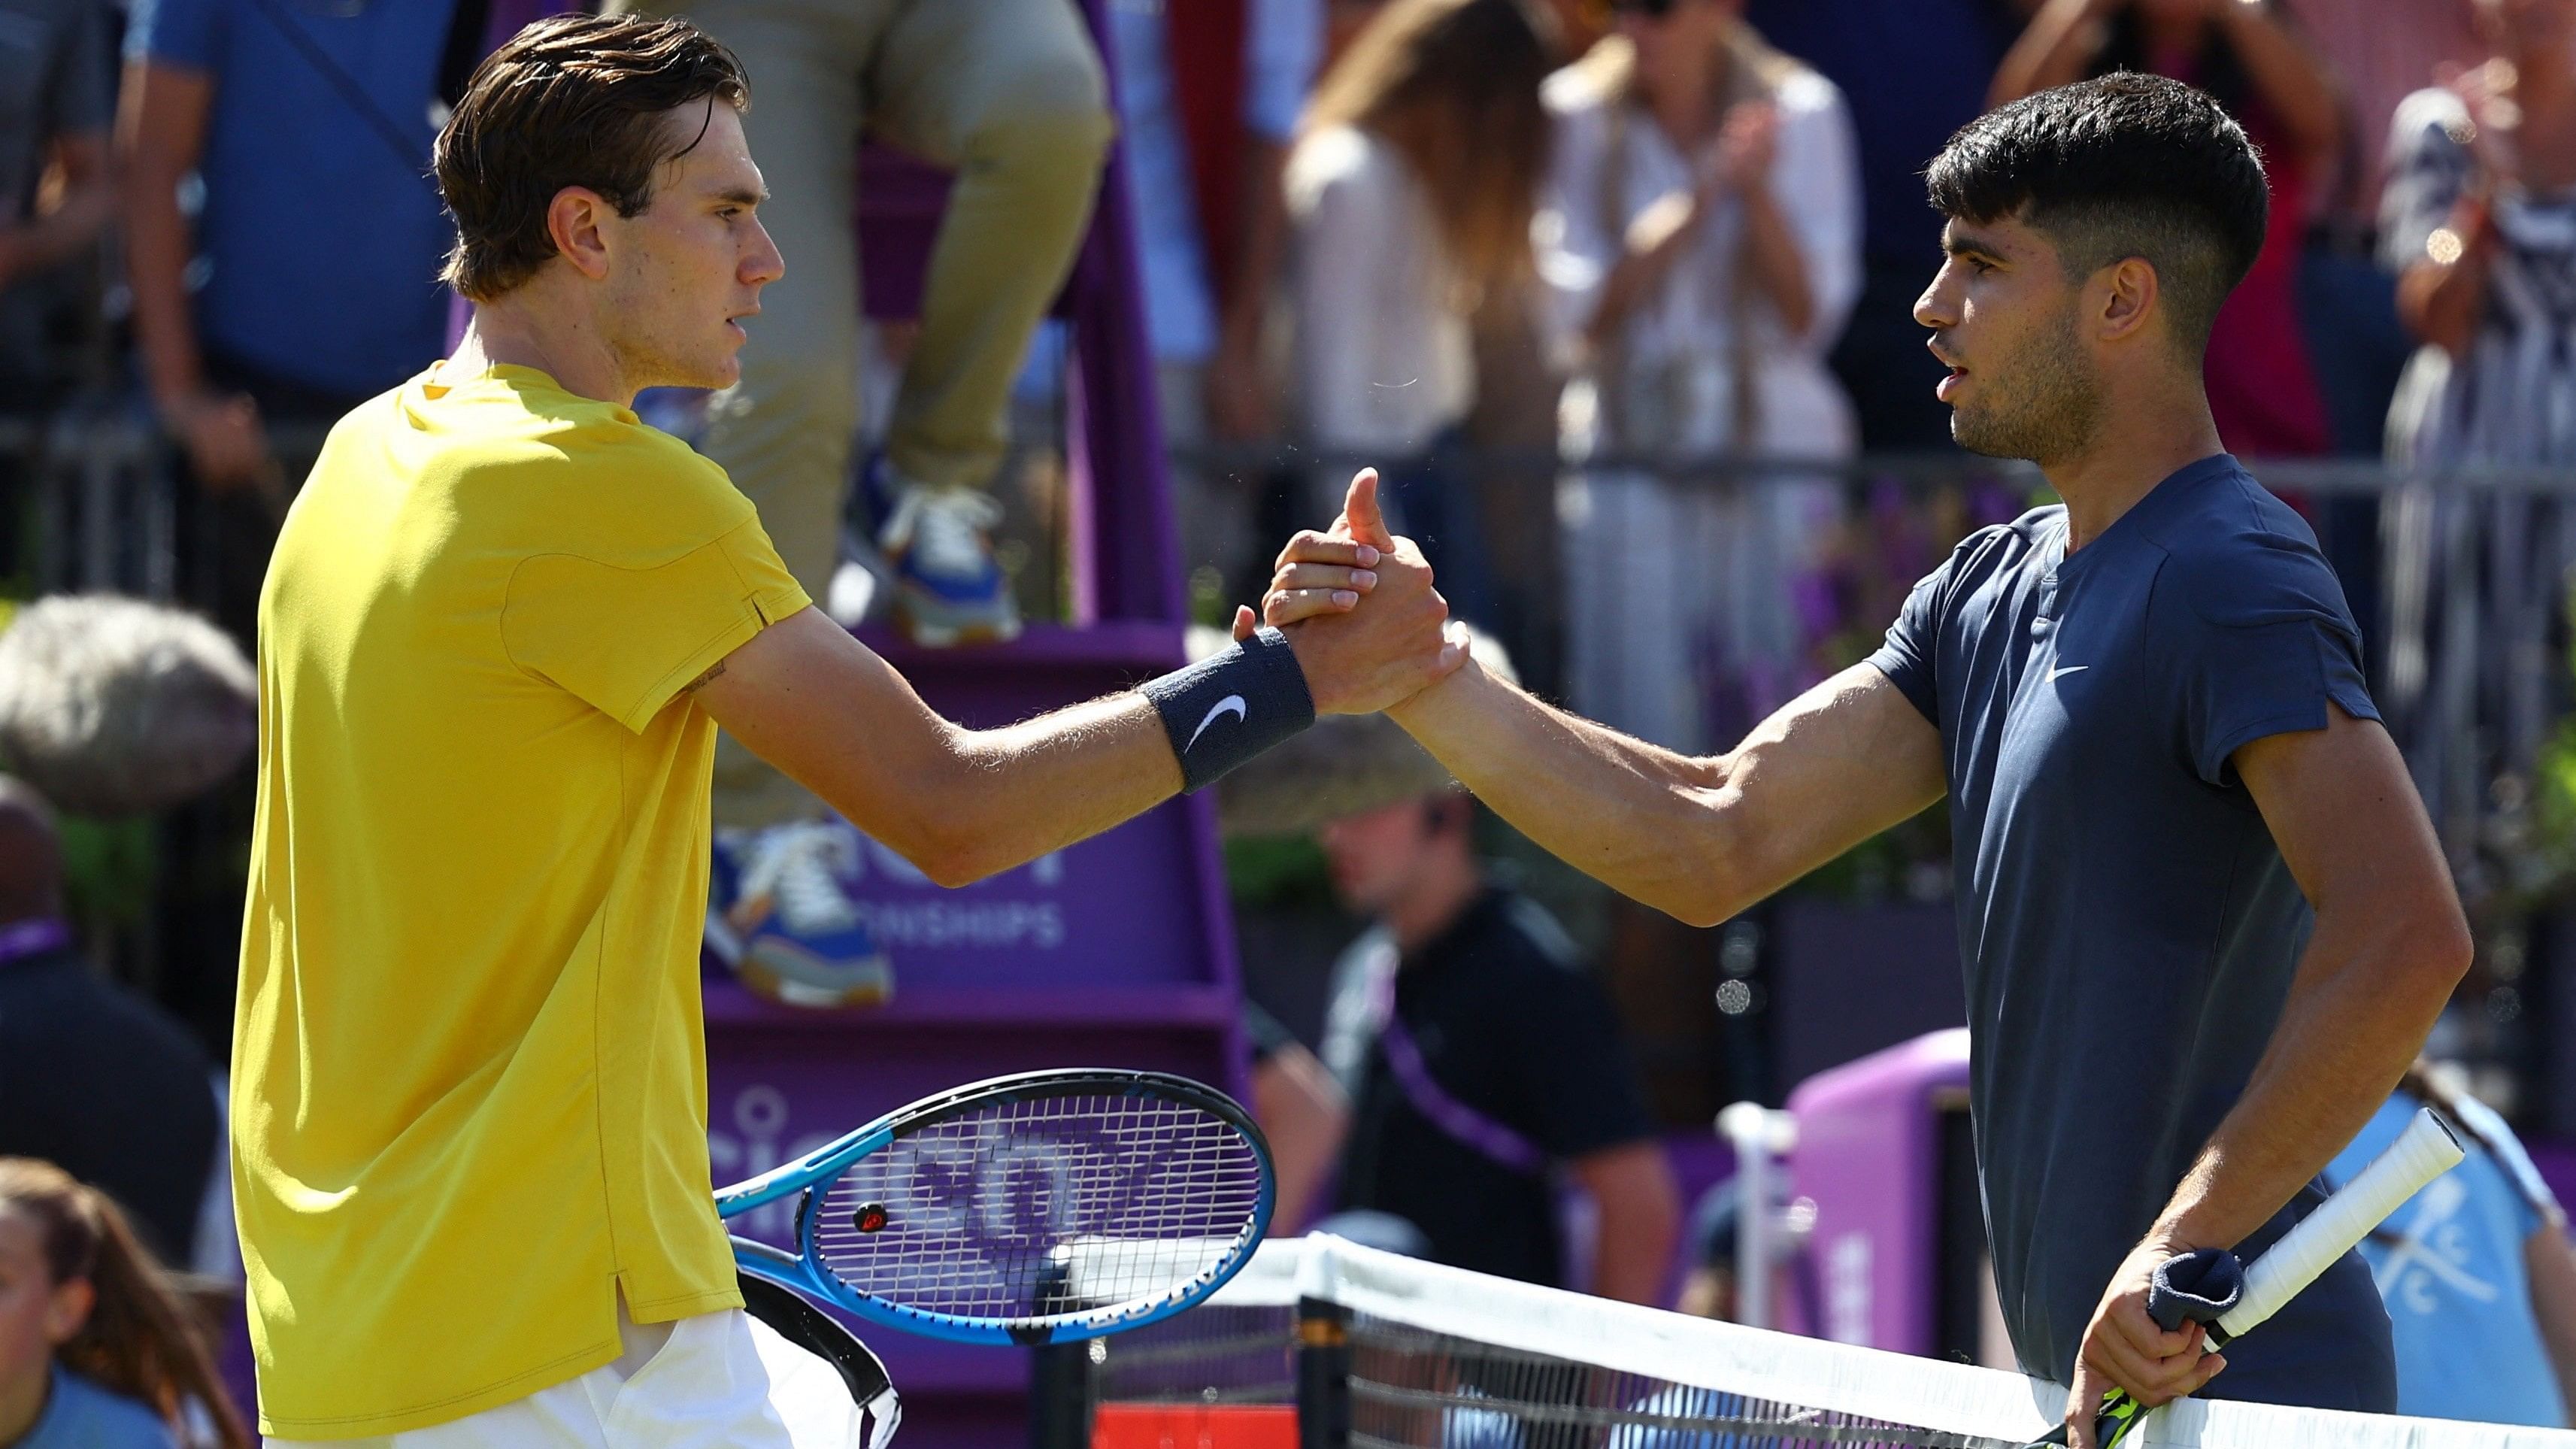 <div class="paragraphs"><p> Spain's Carlos Alcaraz&nbsp;shakes hands with&nbsp;Britain's Jack Draper after getting beaten by the Briton in his round of 16 match at the&nbsp;Queen's Club Championships.</p></div>